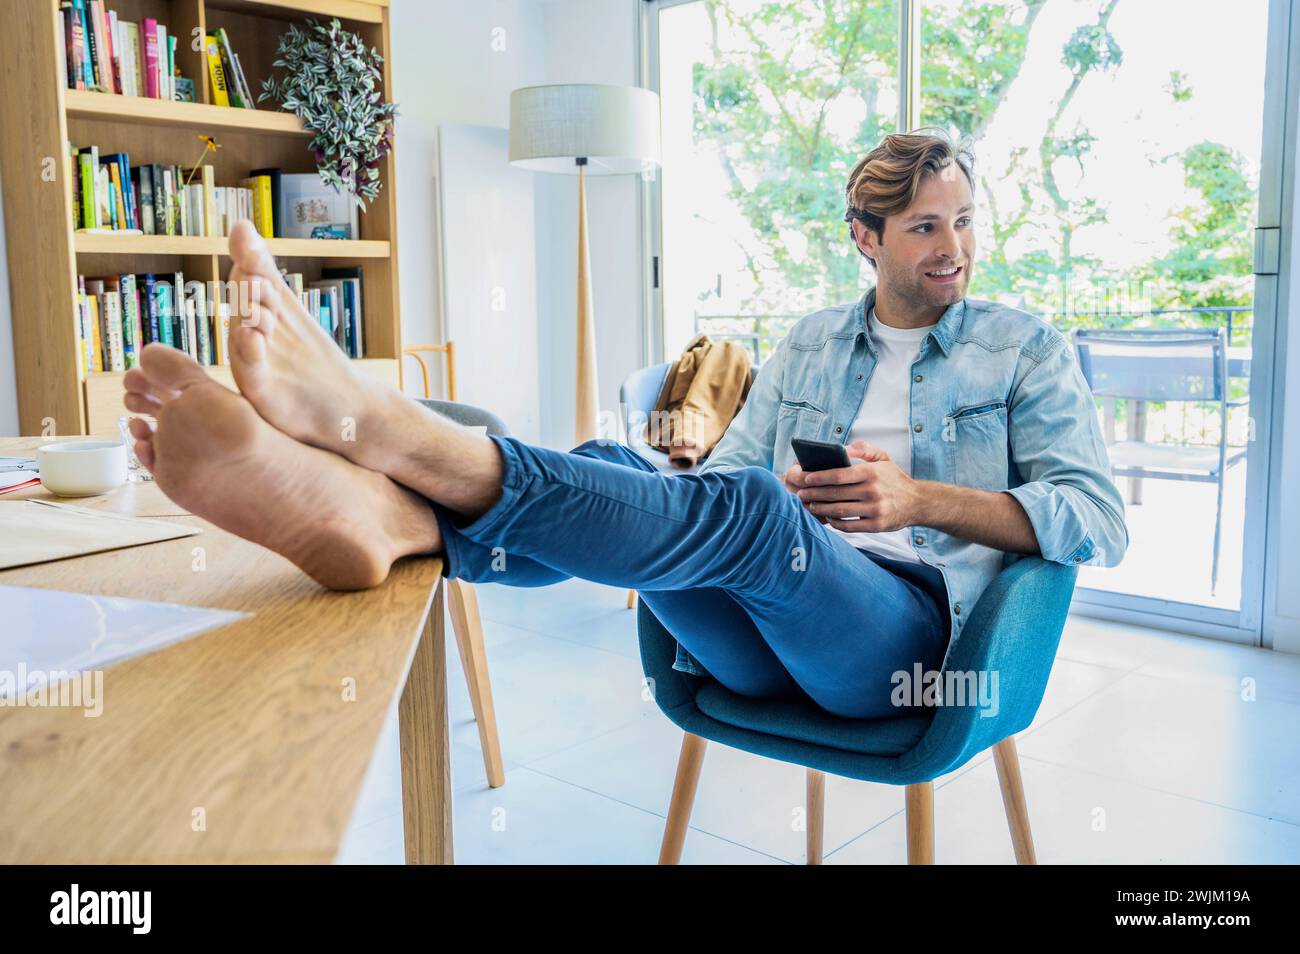 Young adult man resting feet while working with smart phone at home Stock Photo